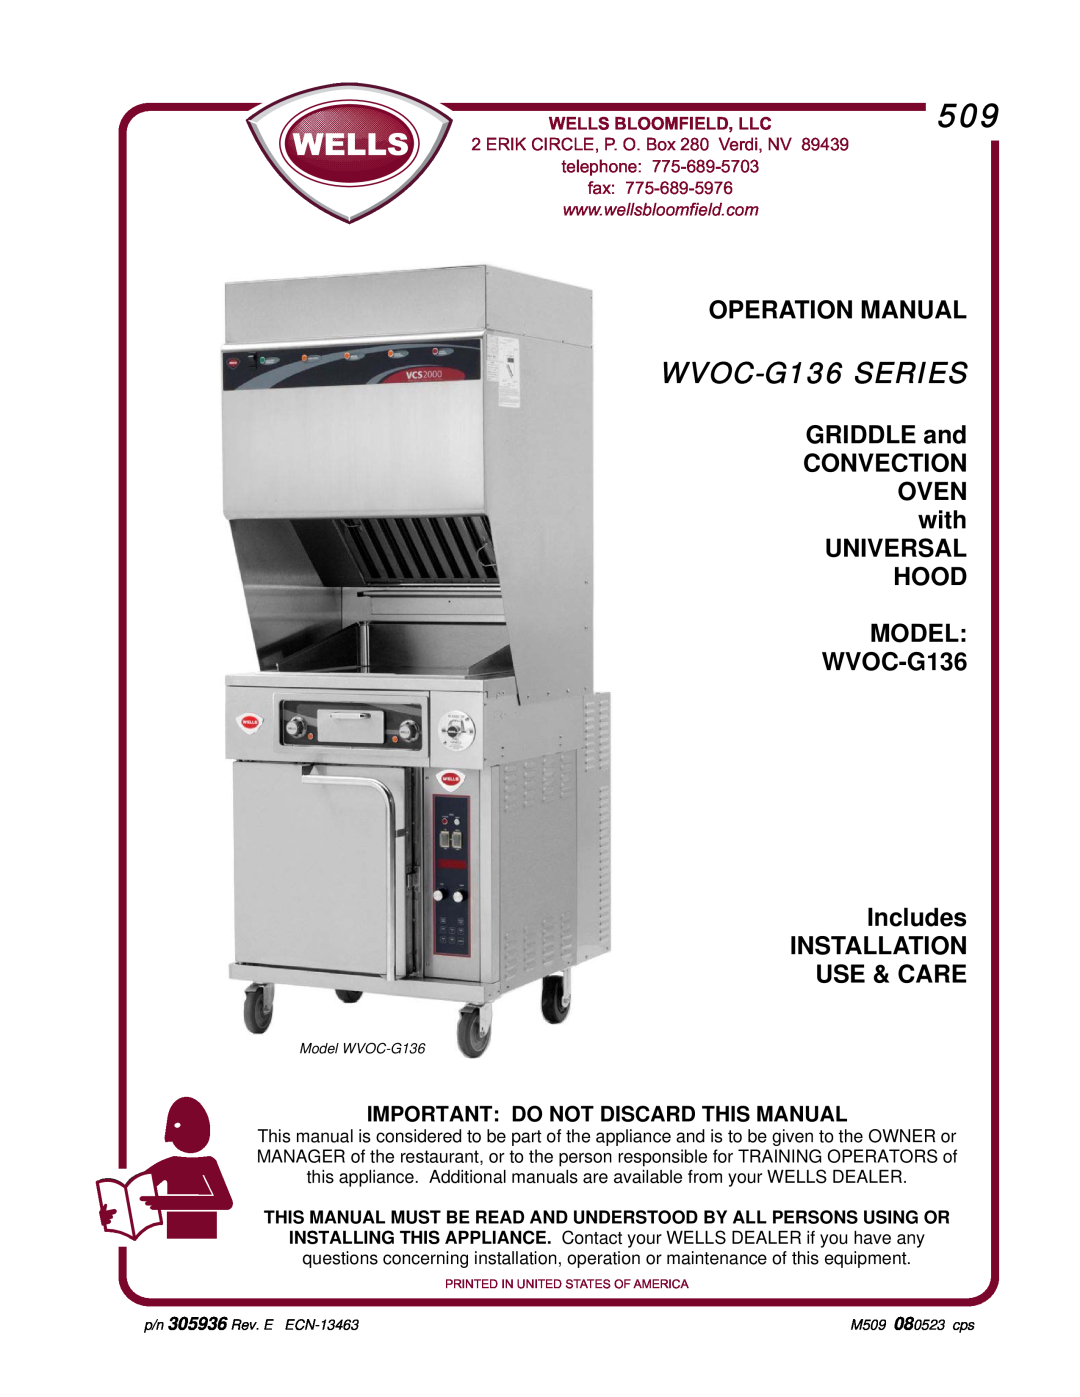 Bloomfield WVOC-G136 operation manual GRIDDLE and CONVECTION OVEN with UNIVERSAL HOOD, Wells Bloomfield, Llc, fax 